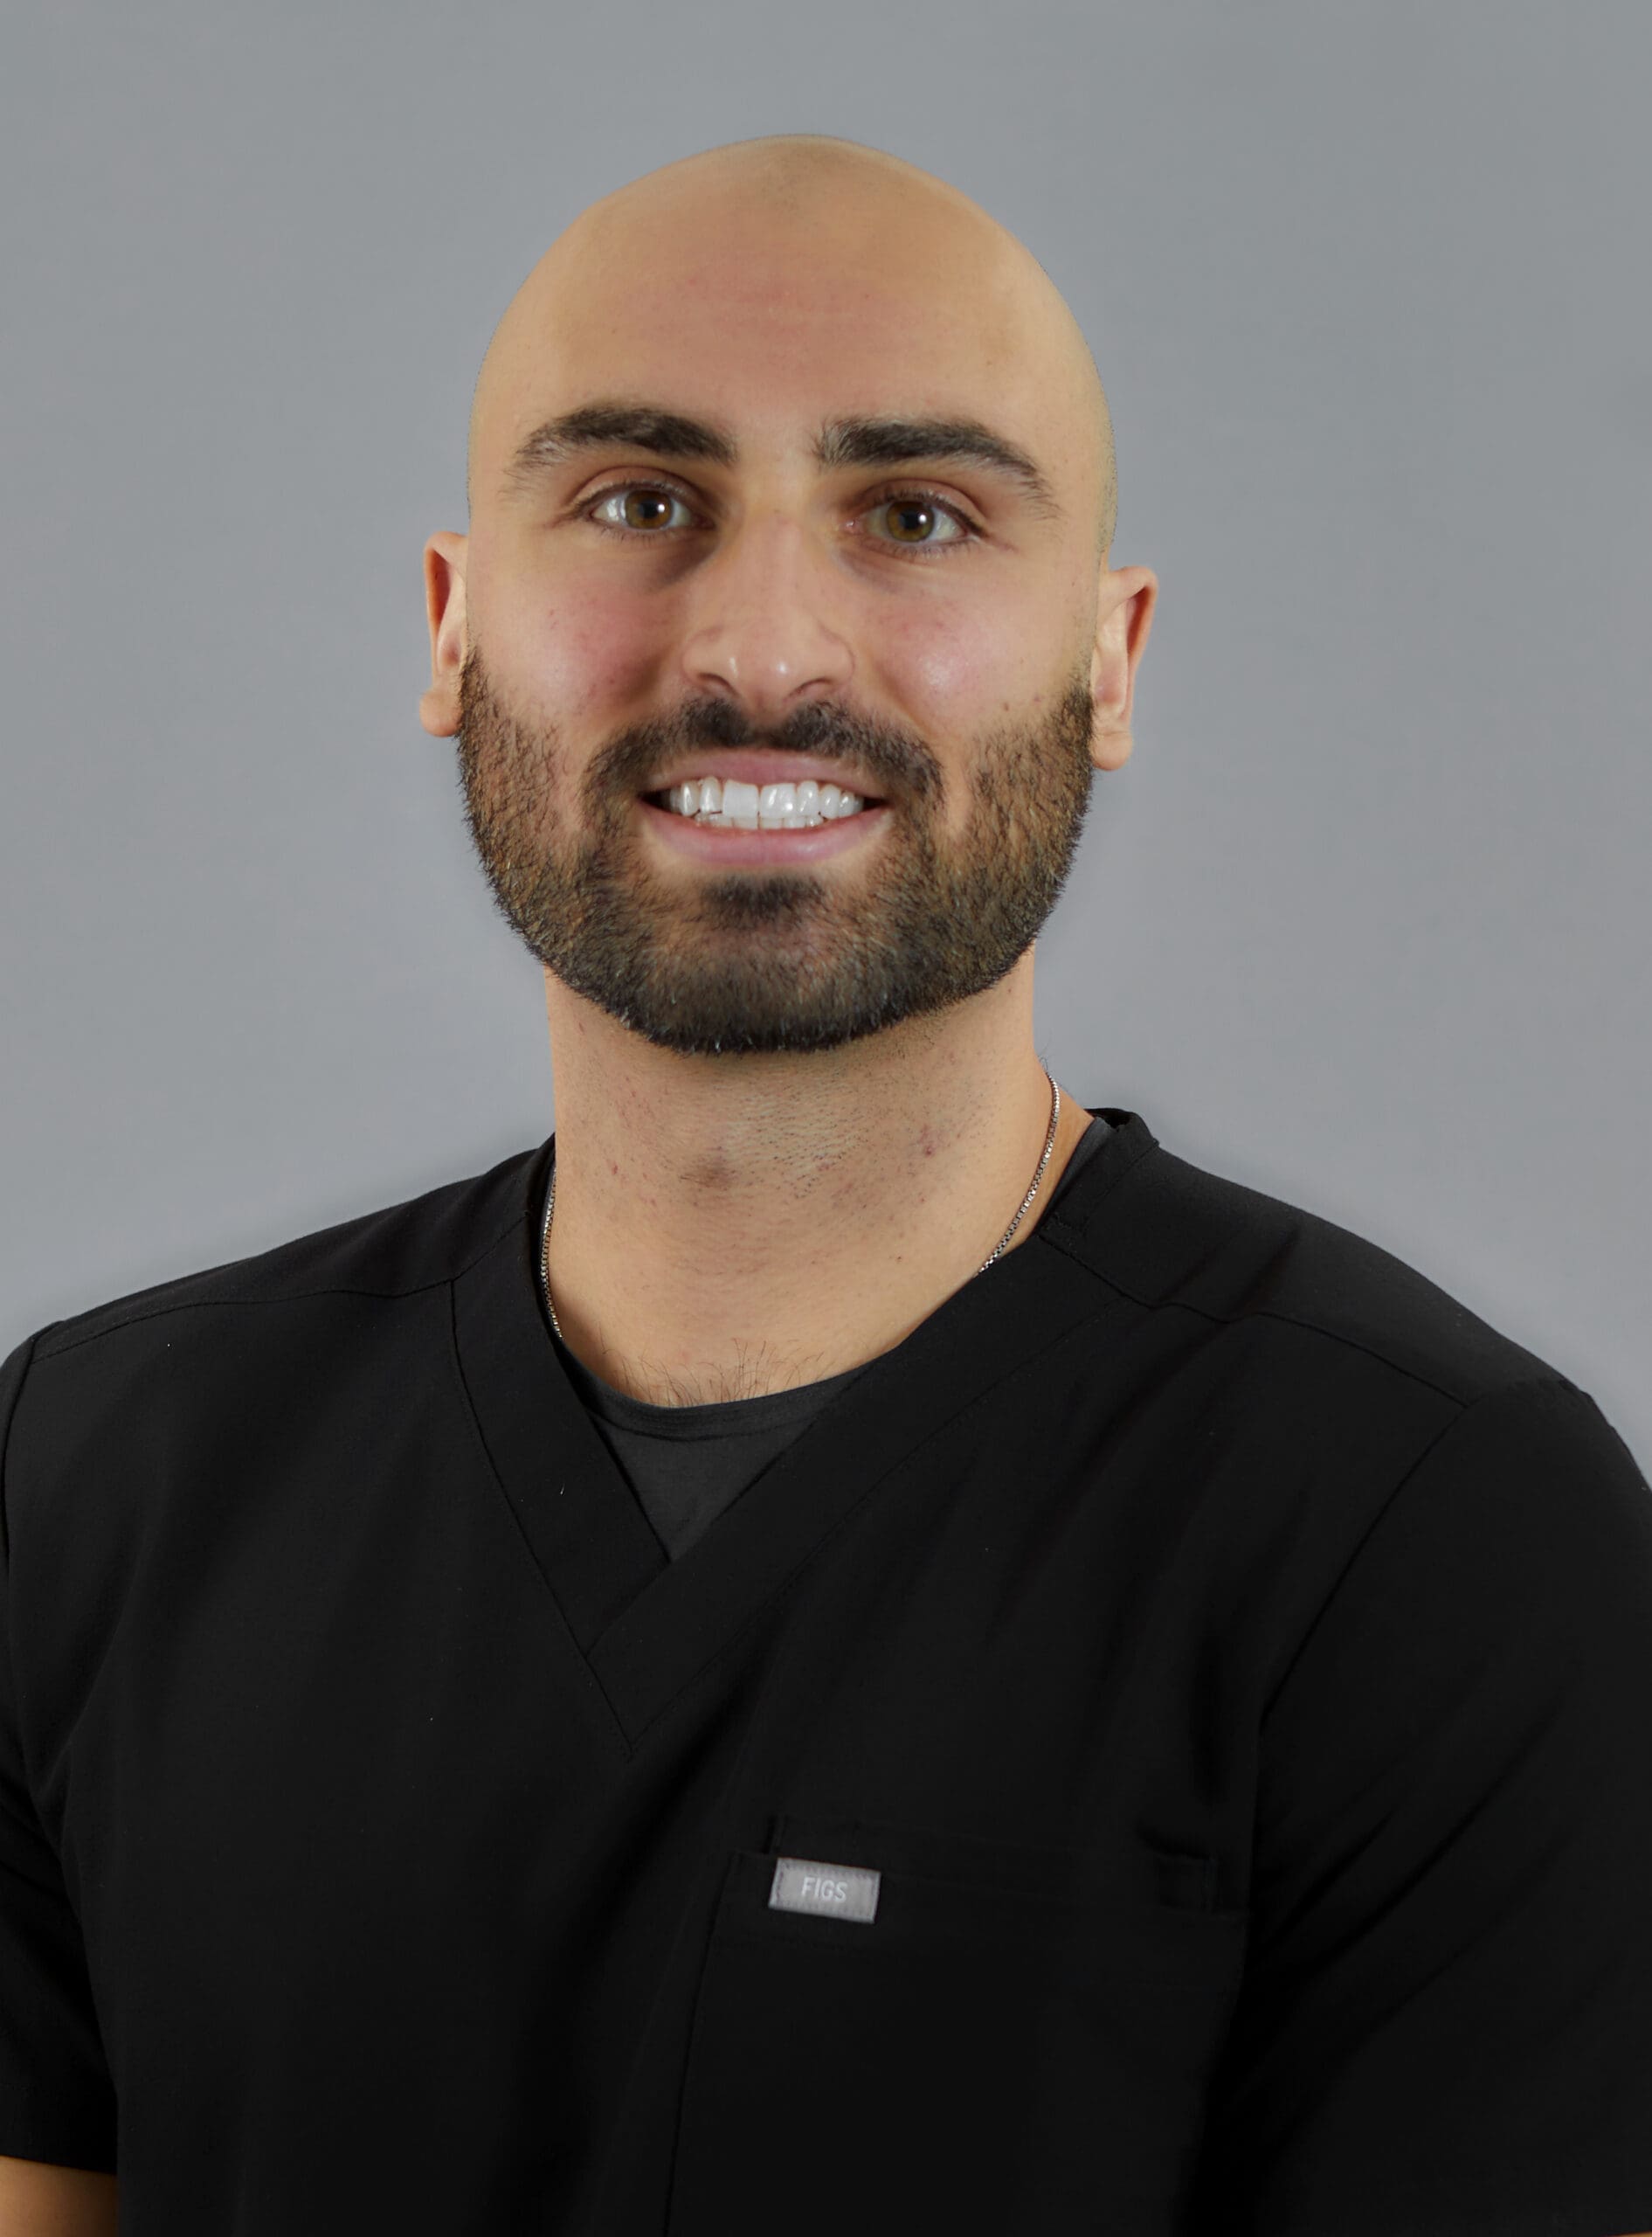 A photo of Dr. Ohan Manoukian, a general dentist, smiling warmly.